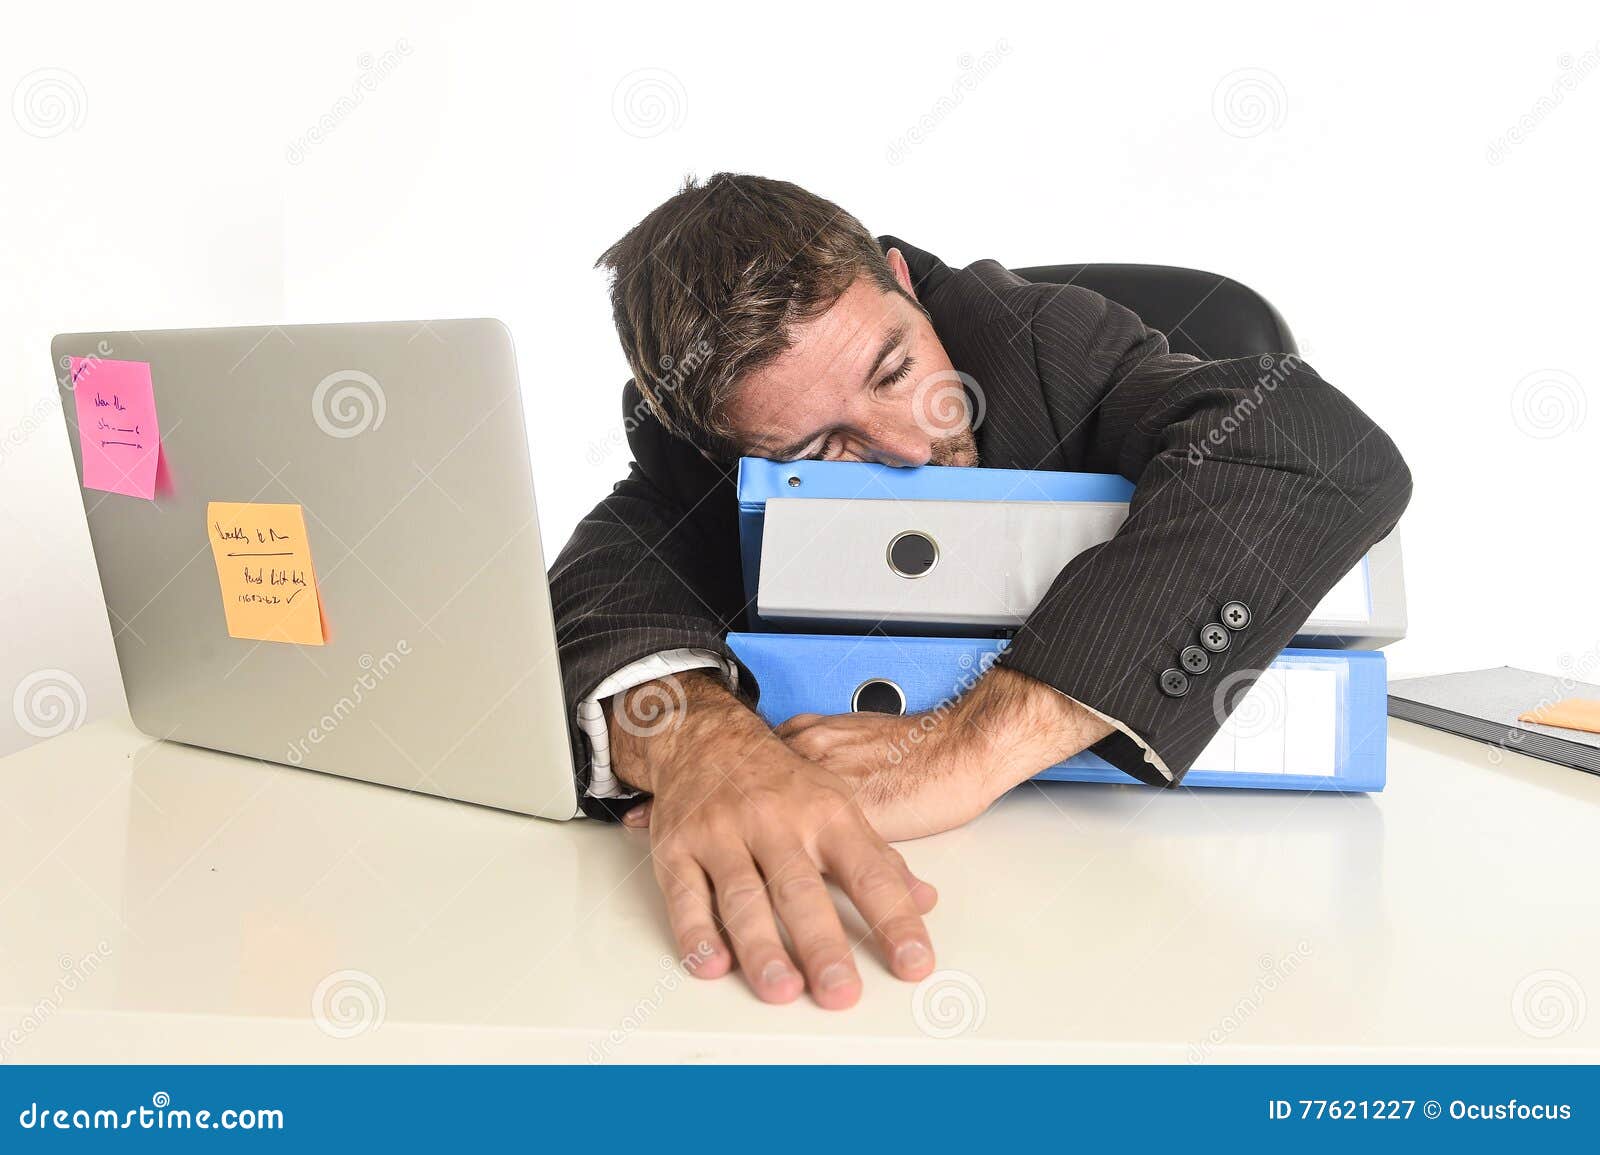 young tired and wasted businessman working in stress at office laptop computer sleeping exhausted